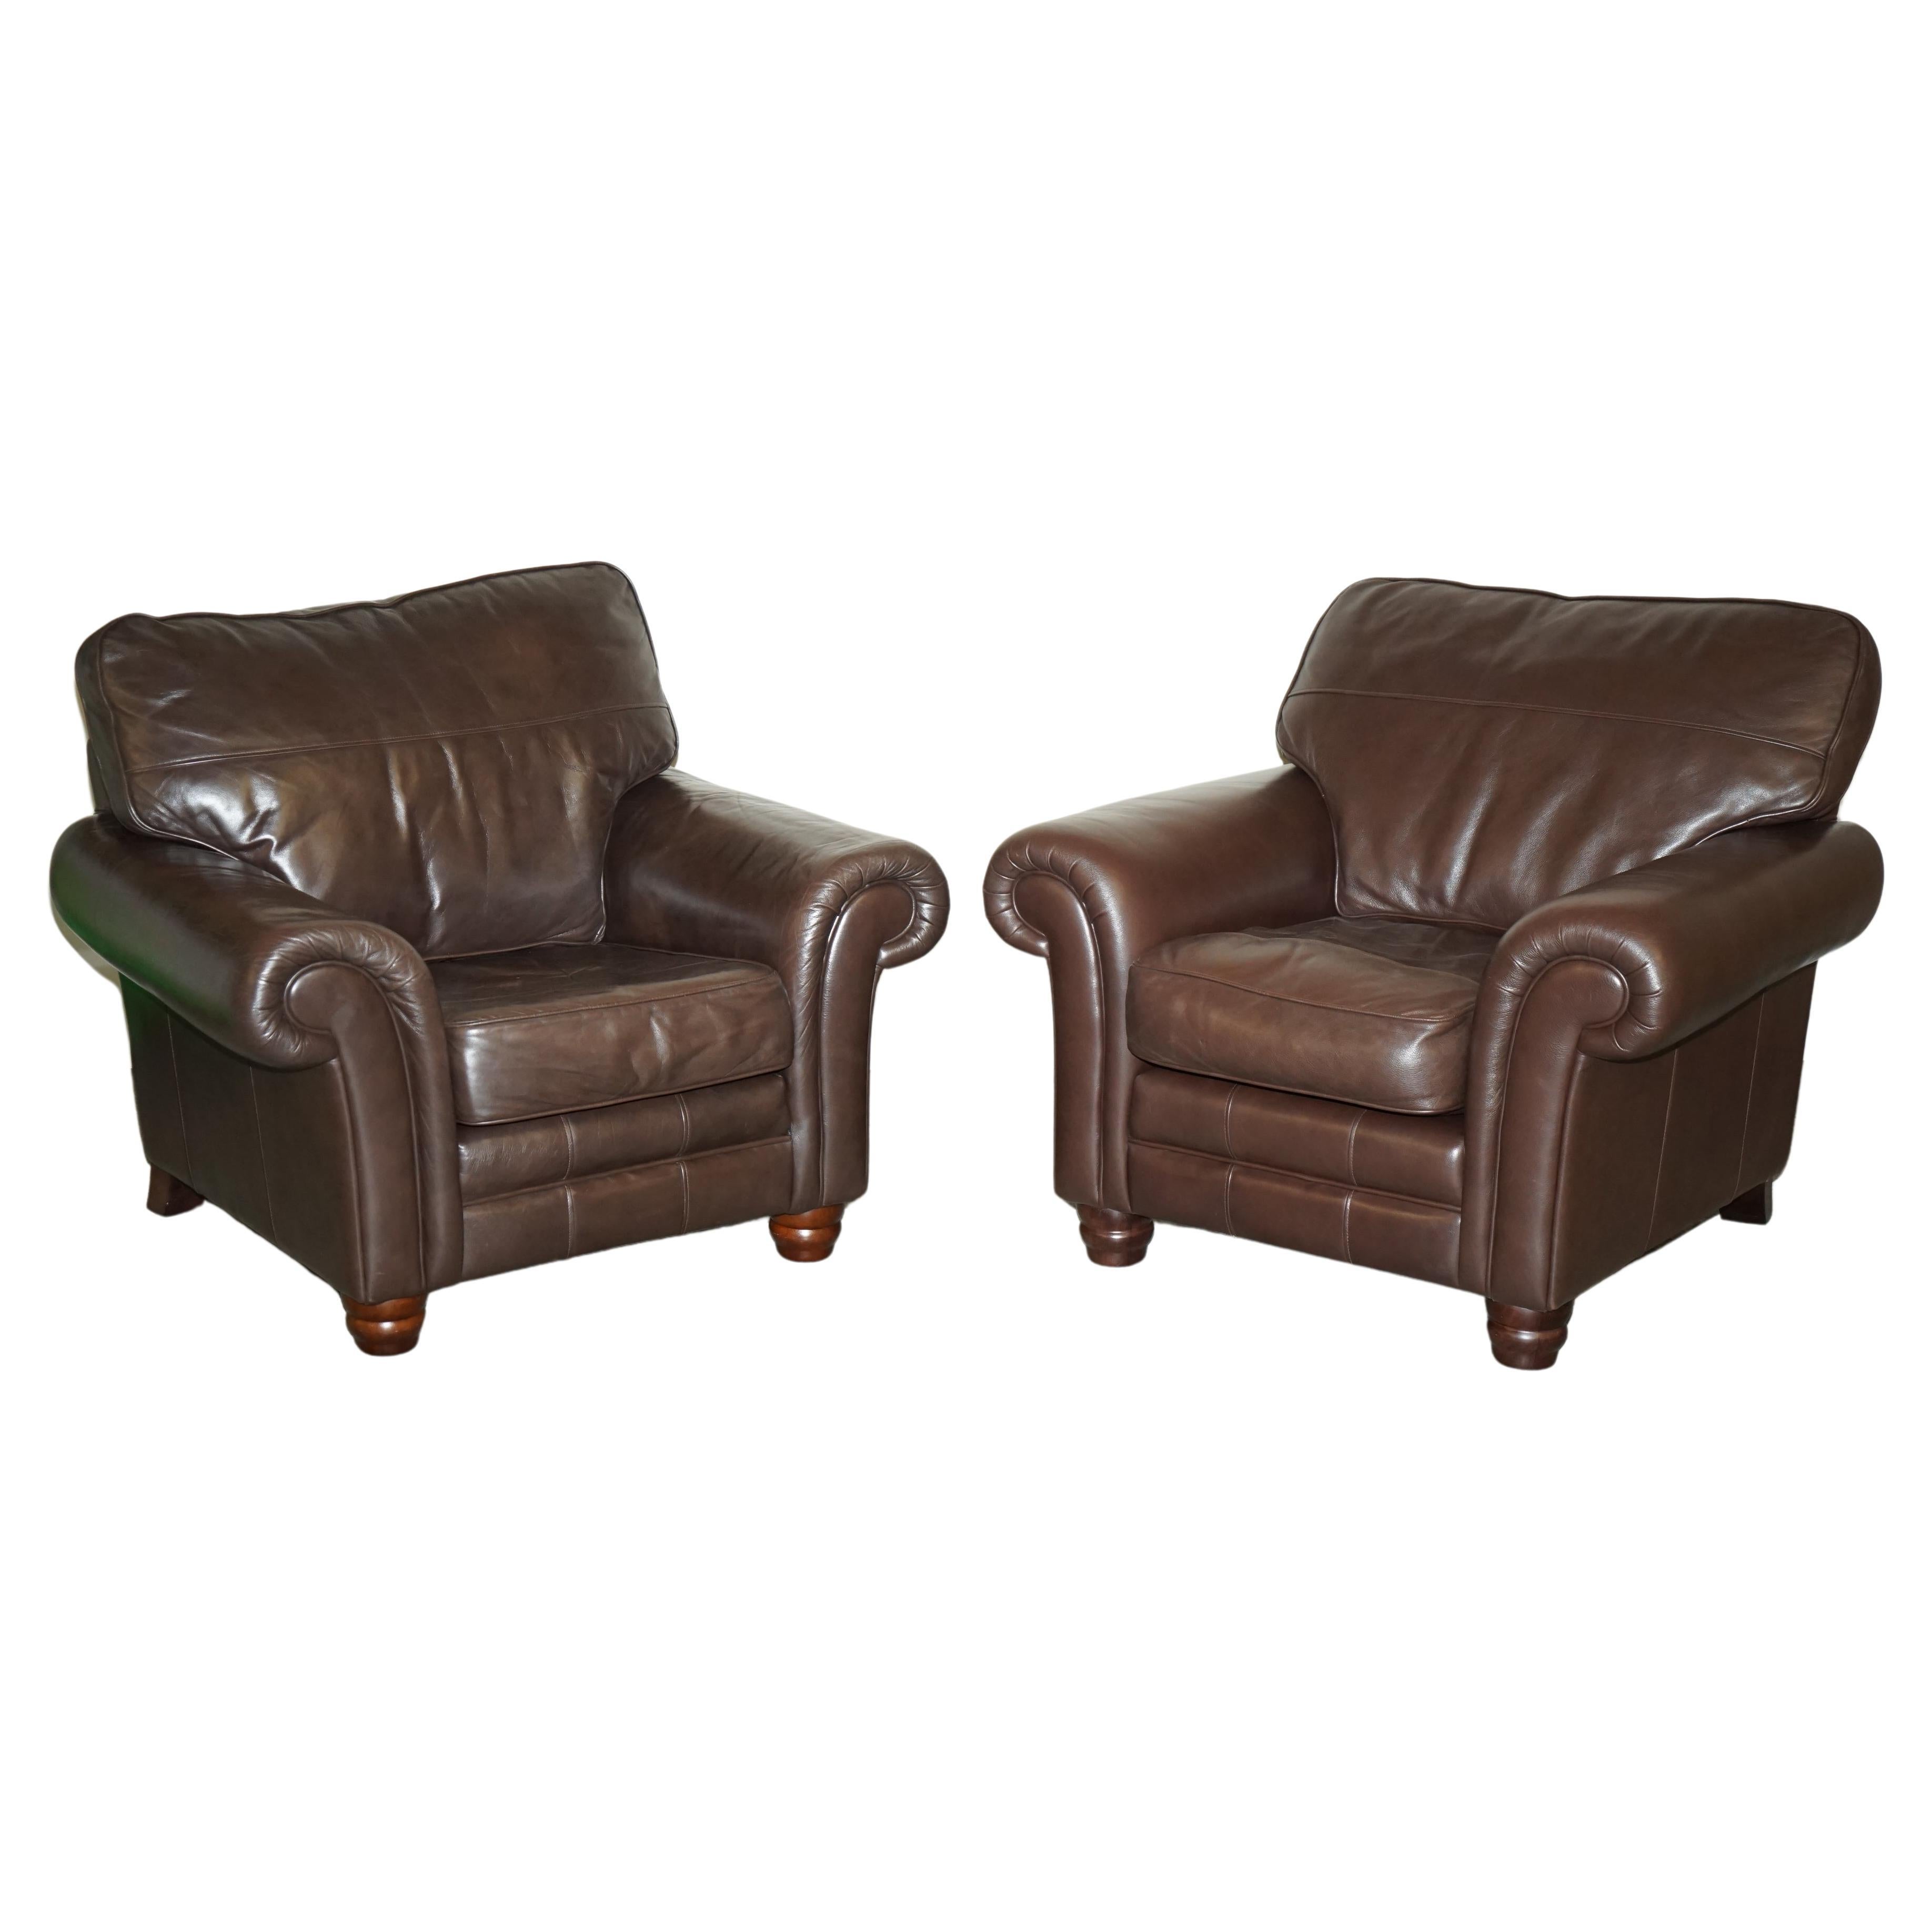 PAIR OF STUNNING COMFORTABLE ViNTAGE DEEP BROWN LEATHER CONTEMPORARY ARMCHAIRS